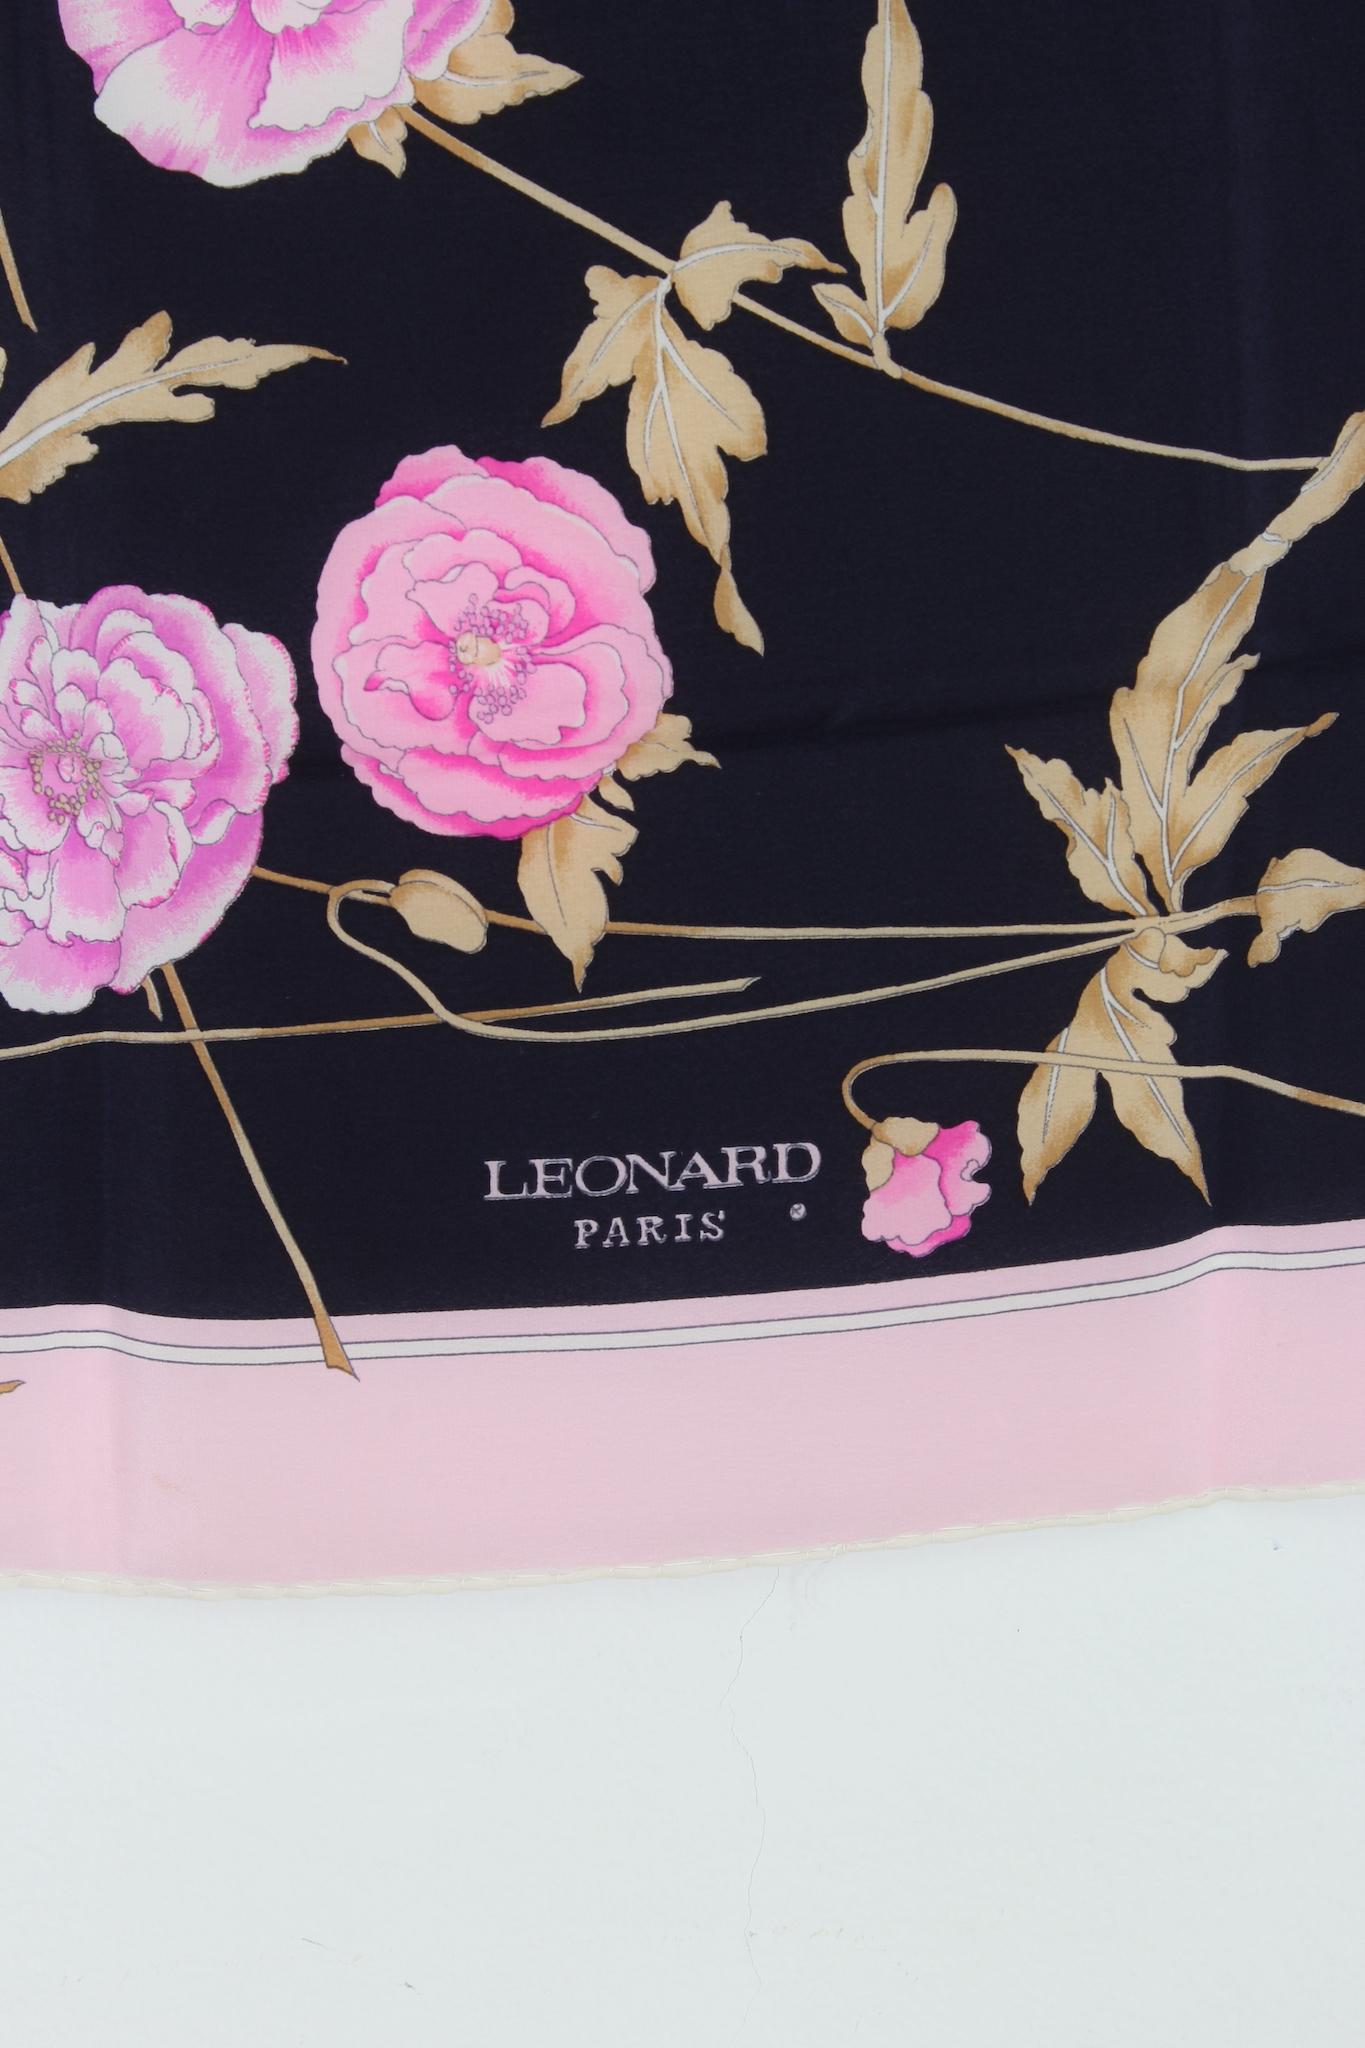 Leonard Paris 1980s vintage scarf. Black color with pink floral designs, 100% silk fabric. Made in Italy.

Measurements: 55 x 59 cm